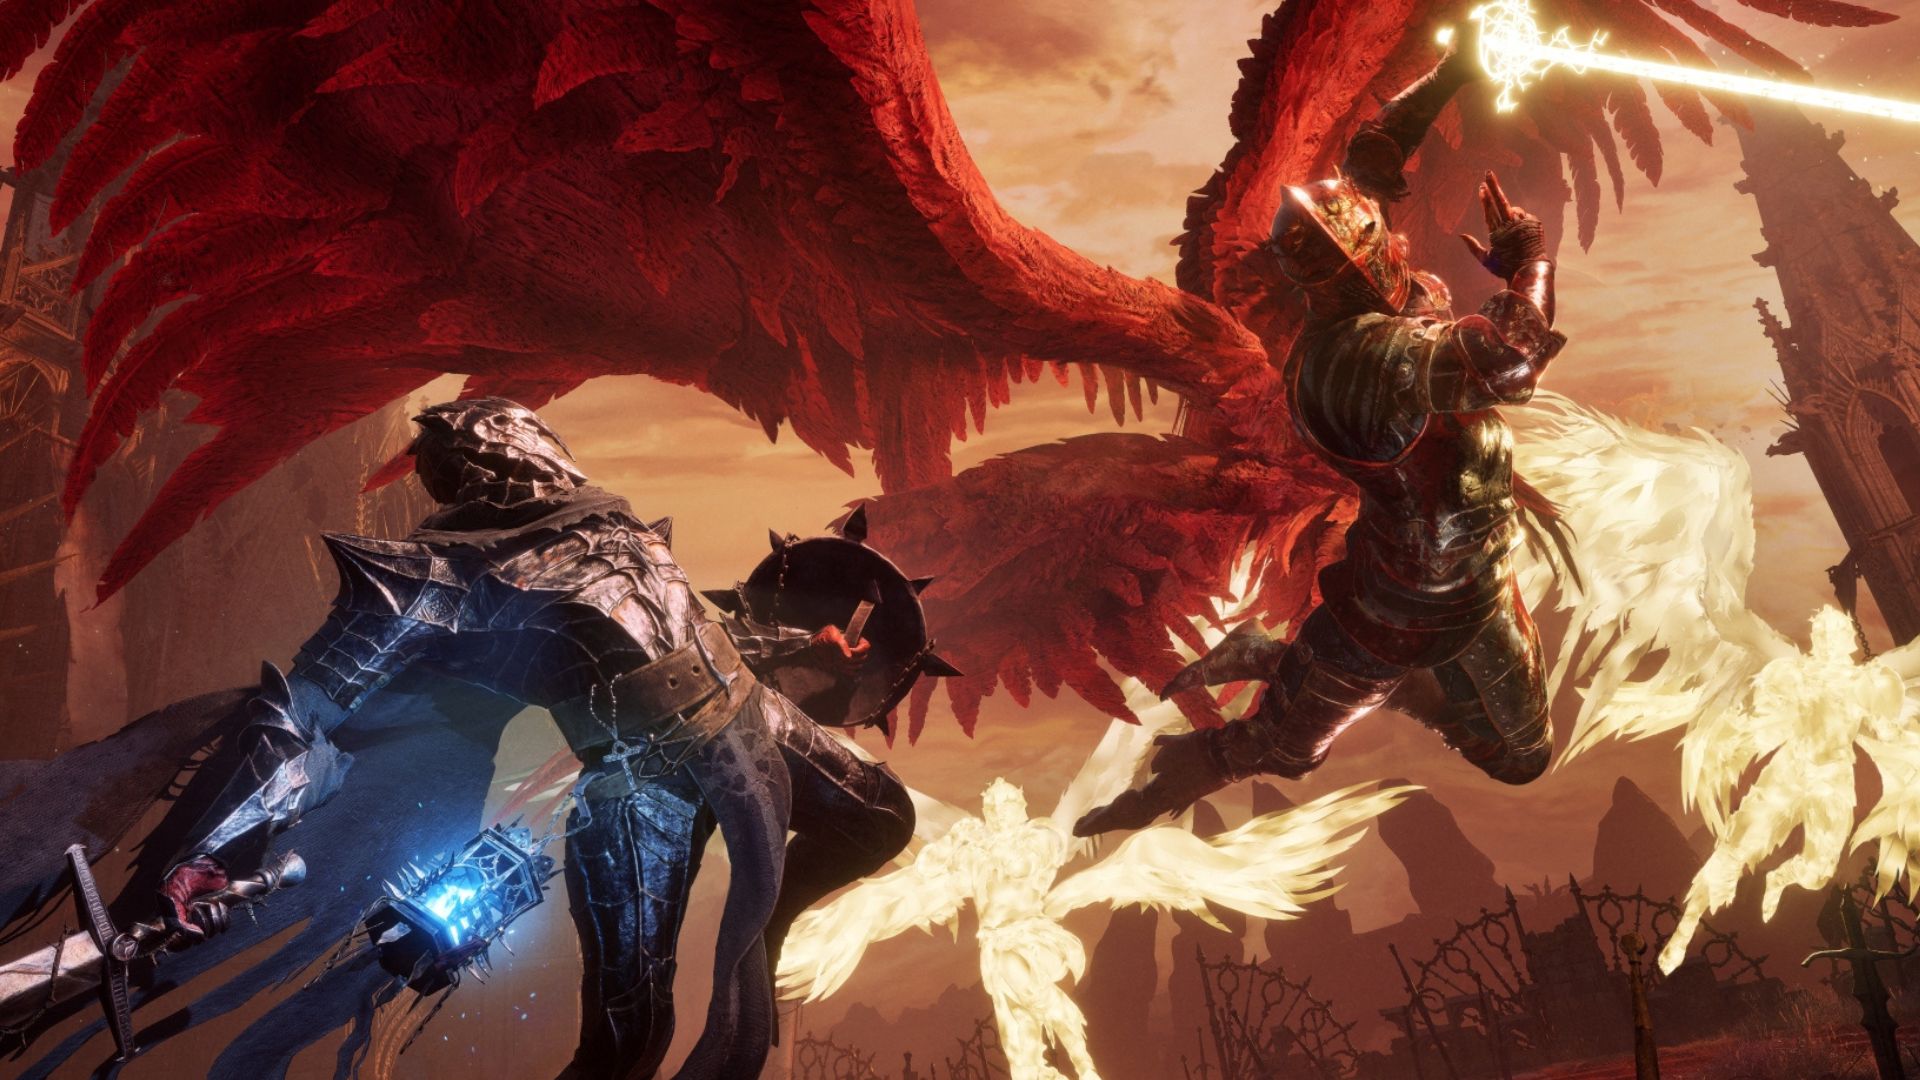 Soulslike Lords of the Fallen gives Diablo 4 competition for most